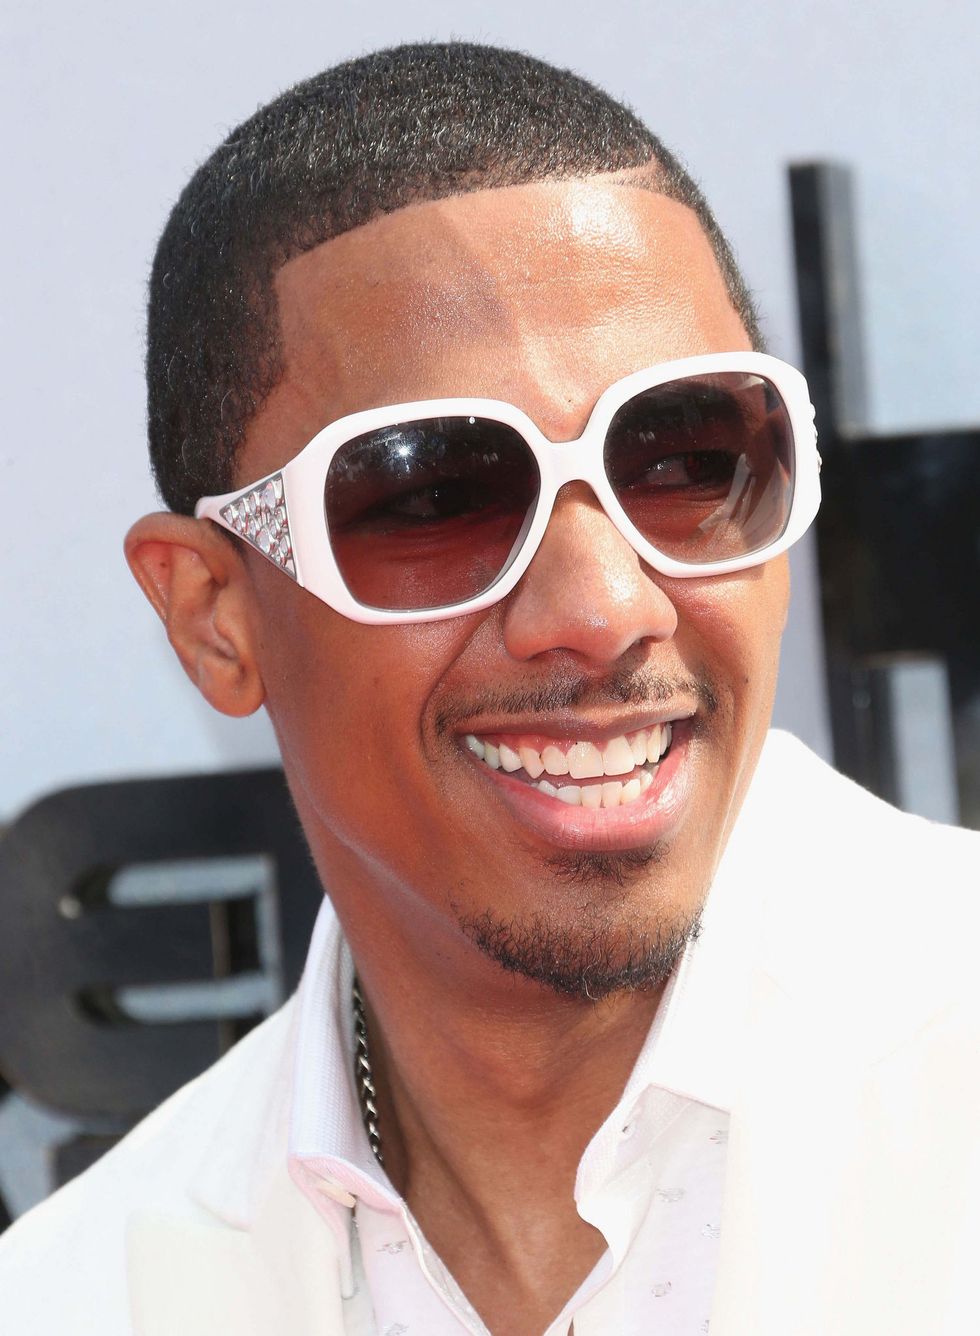 Why Does Nick Cannon Think Planned Parenthood Practices Eugenics?